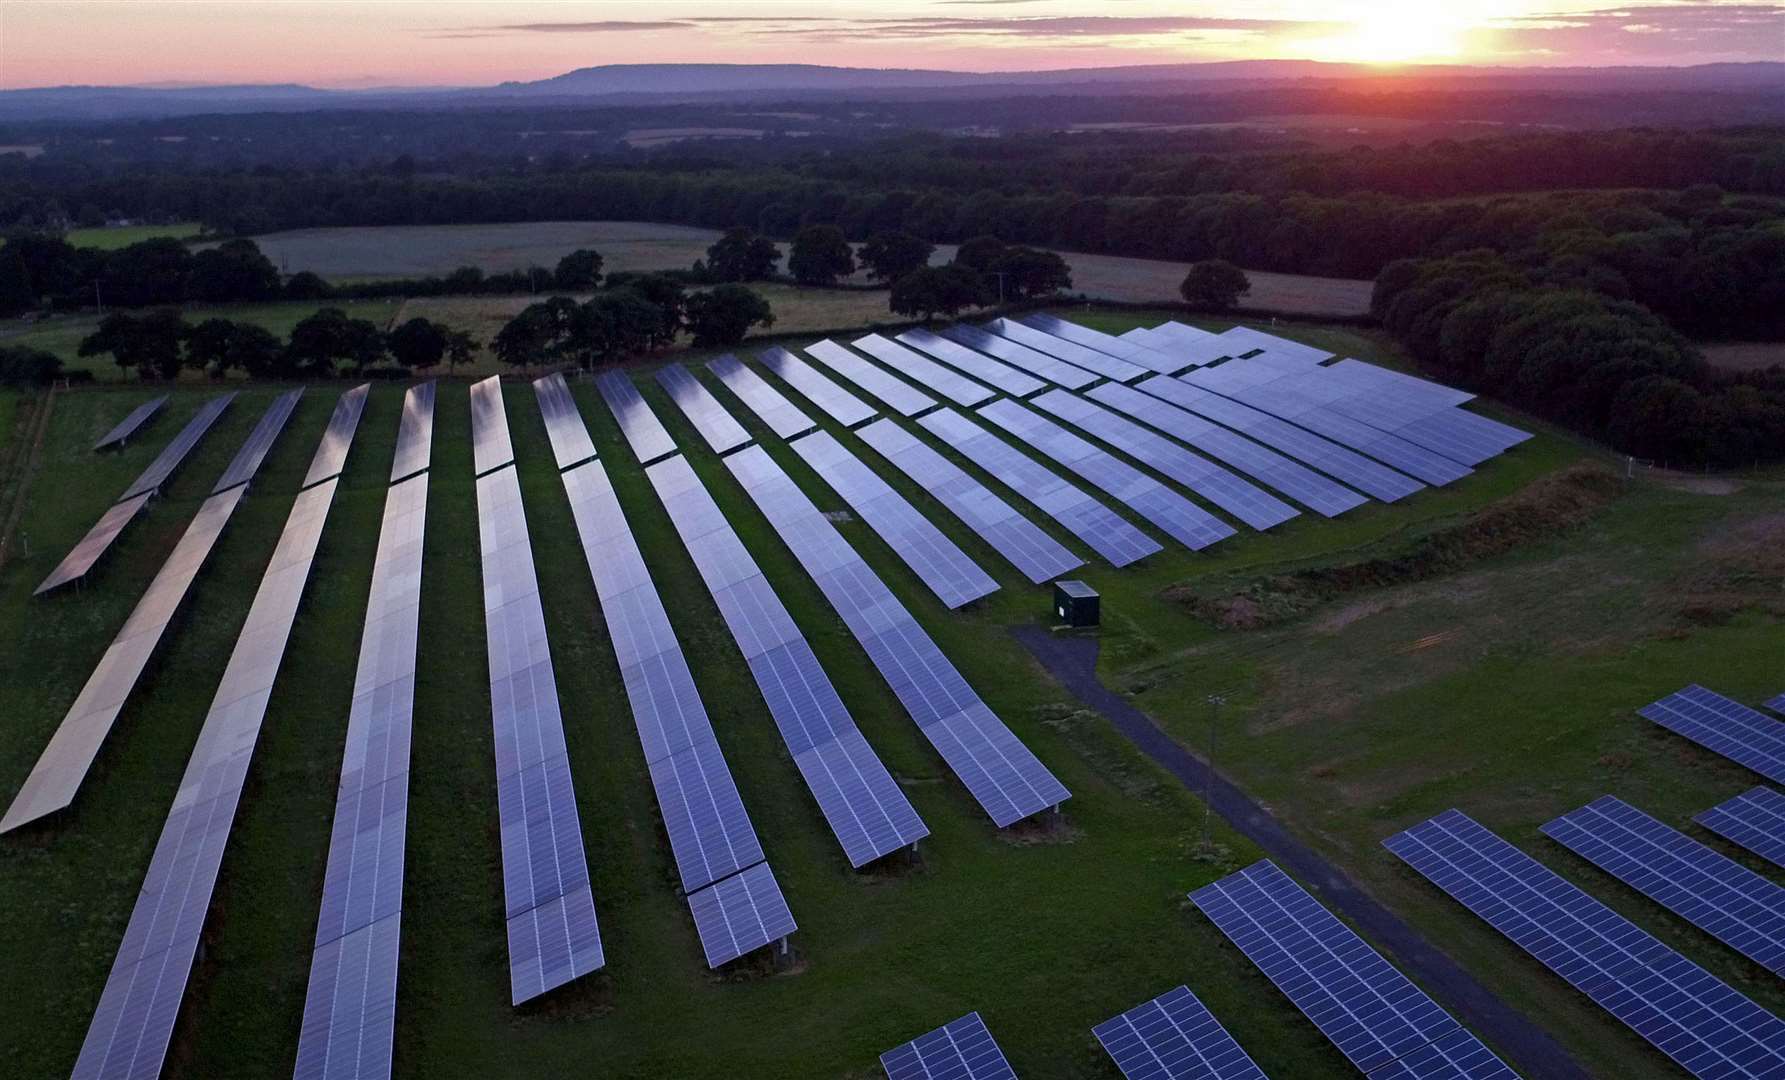 Once complete, Cleve Hill Solar Park in Graveney, between Faversham and Whitstable, will be home to 880,000 solar panels